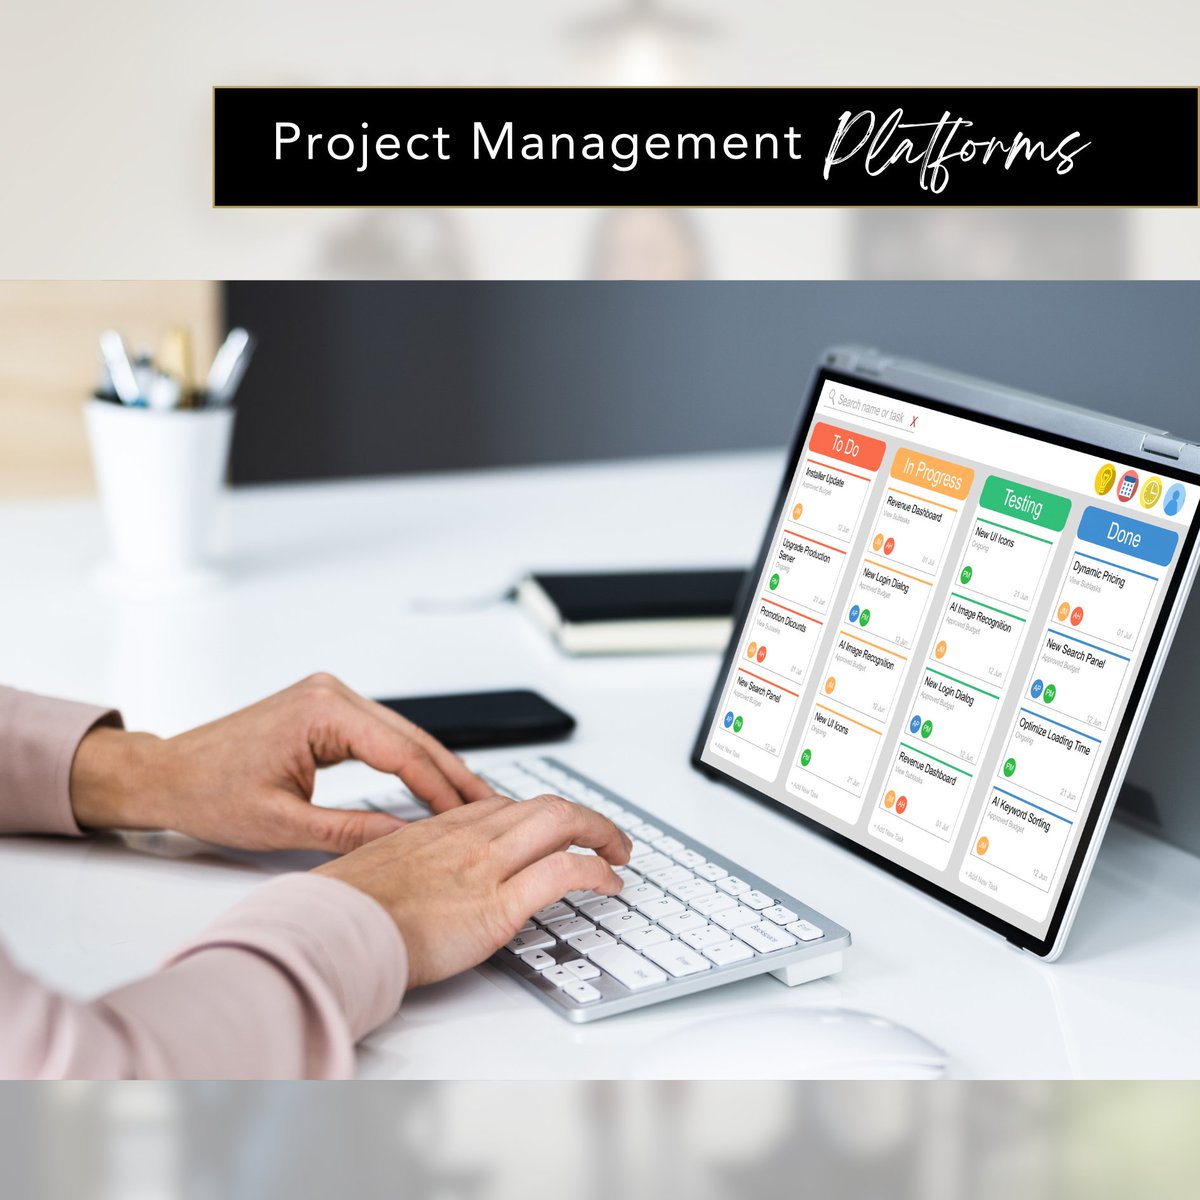 Learn about how Stageforce–the best Home Staging inventory management software can help your business: stageforce.com 

#homestagingtips #homestagingbusiness #projectmanagement #stageforce